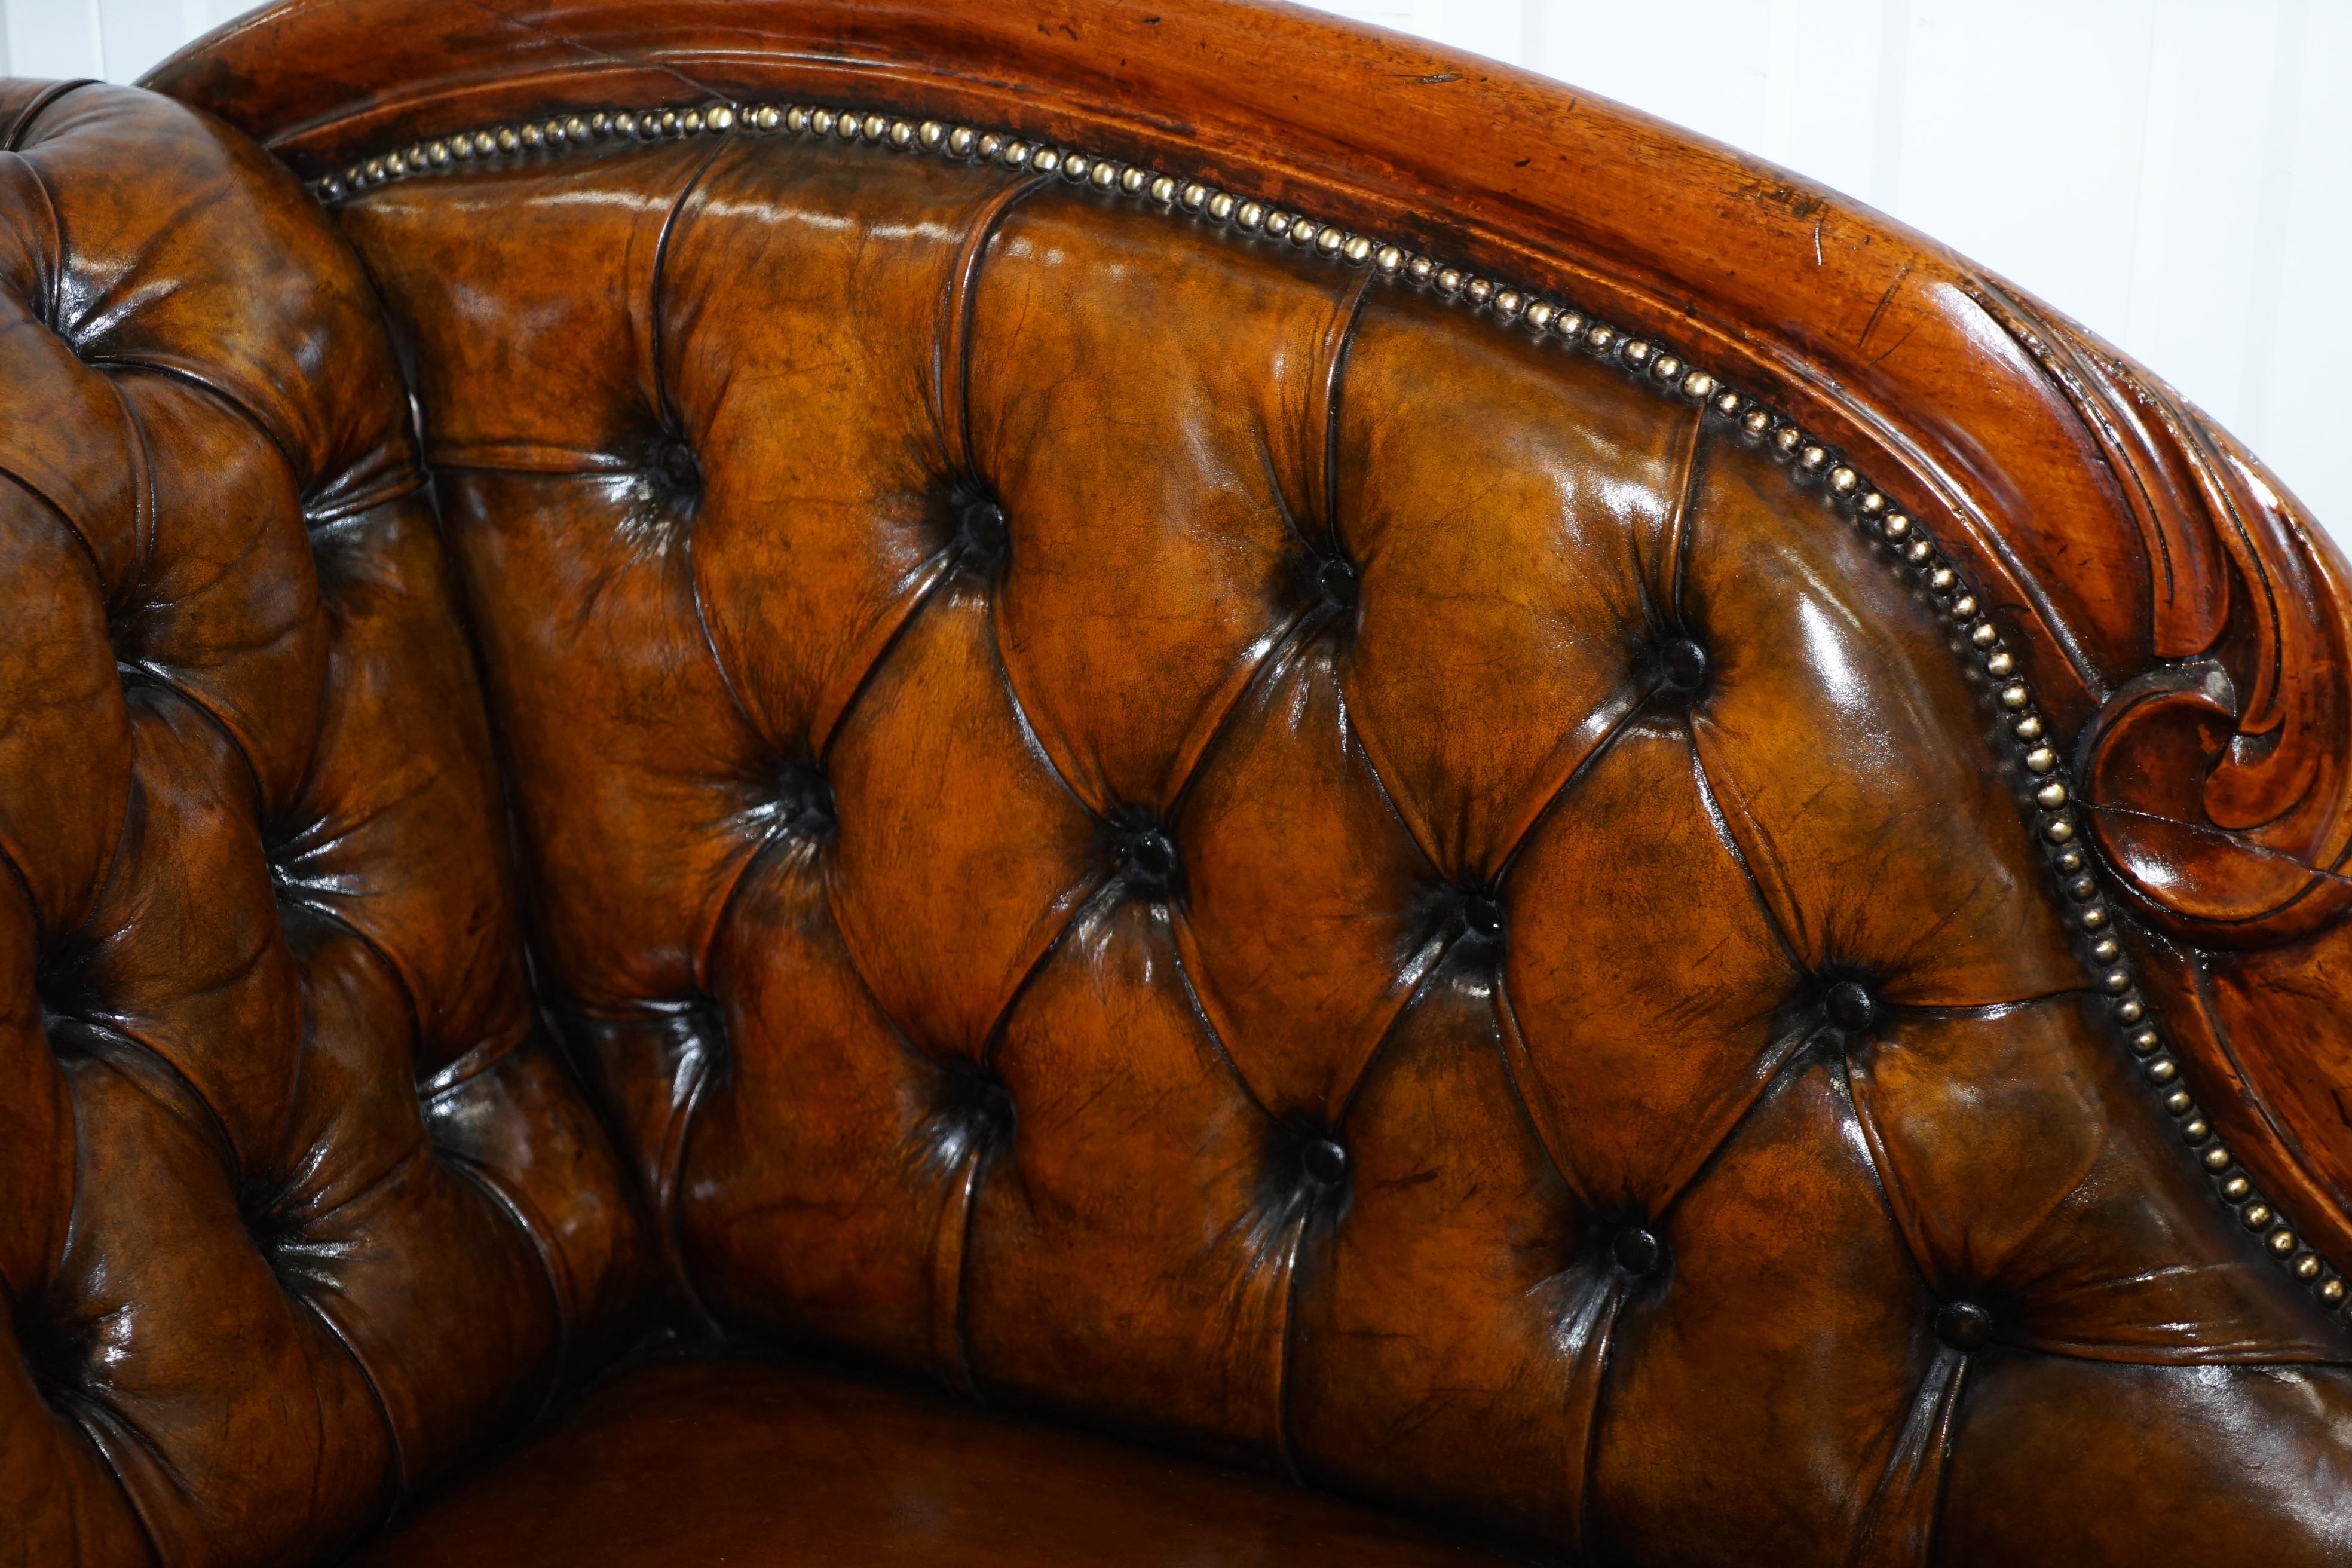 English Stunning Restored Victorian Chesterfield Aged Brown Leather Chaise Longue Daybed